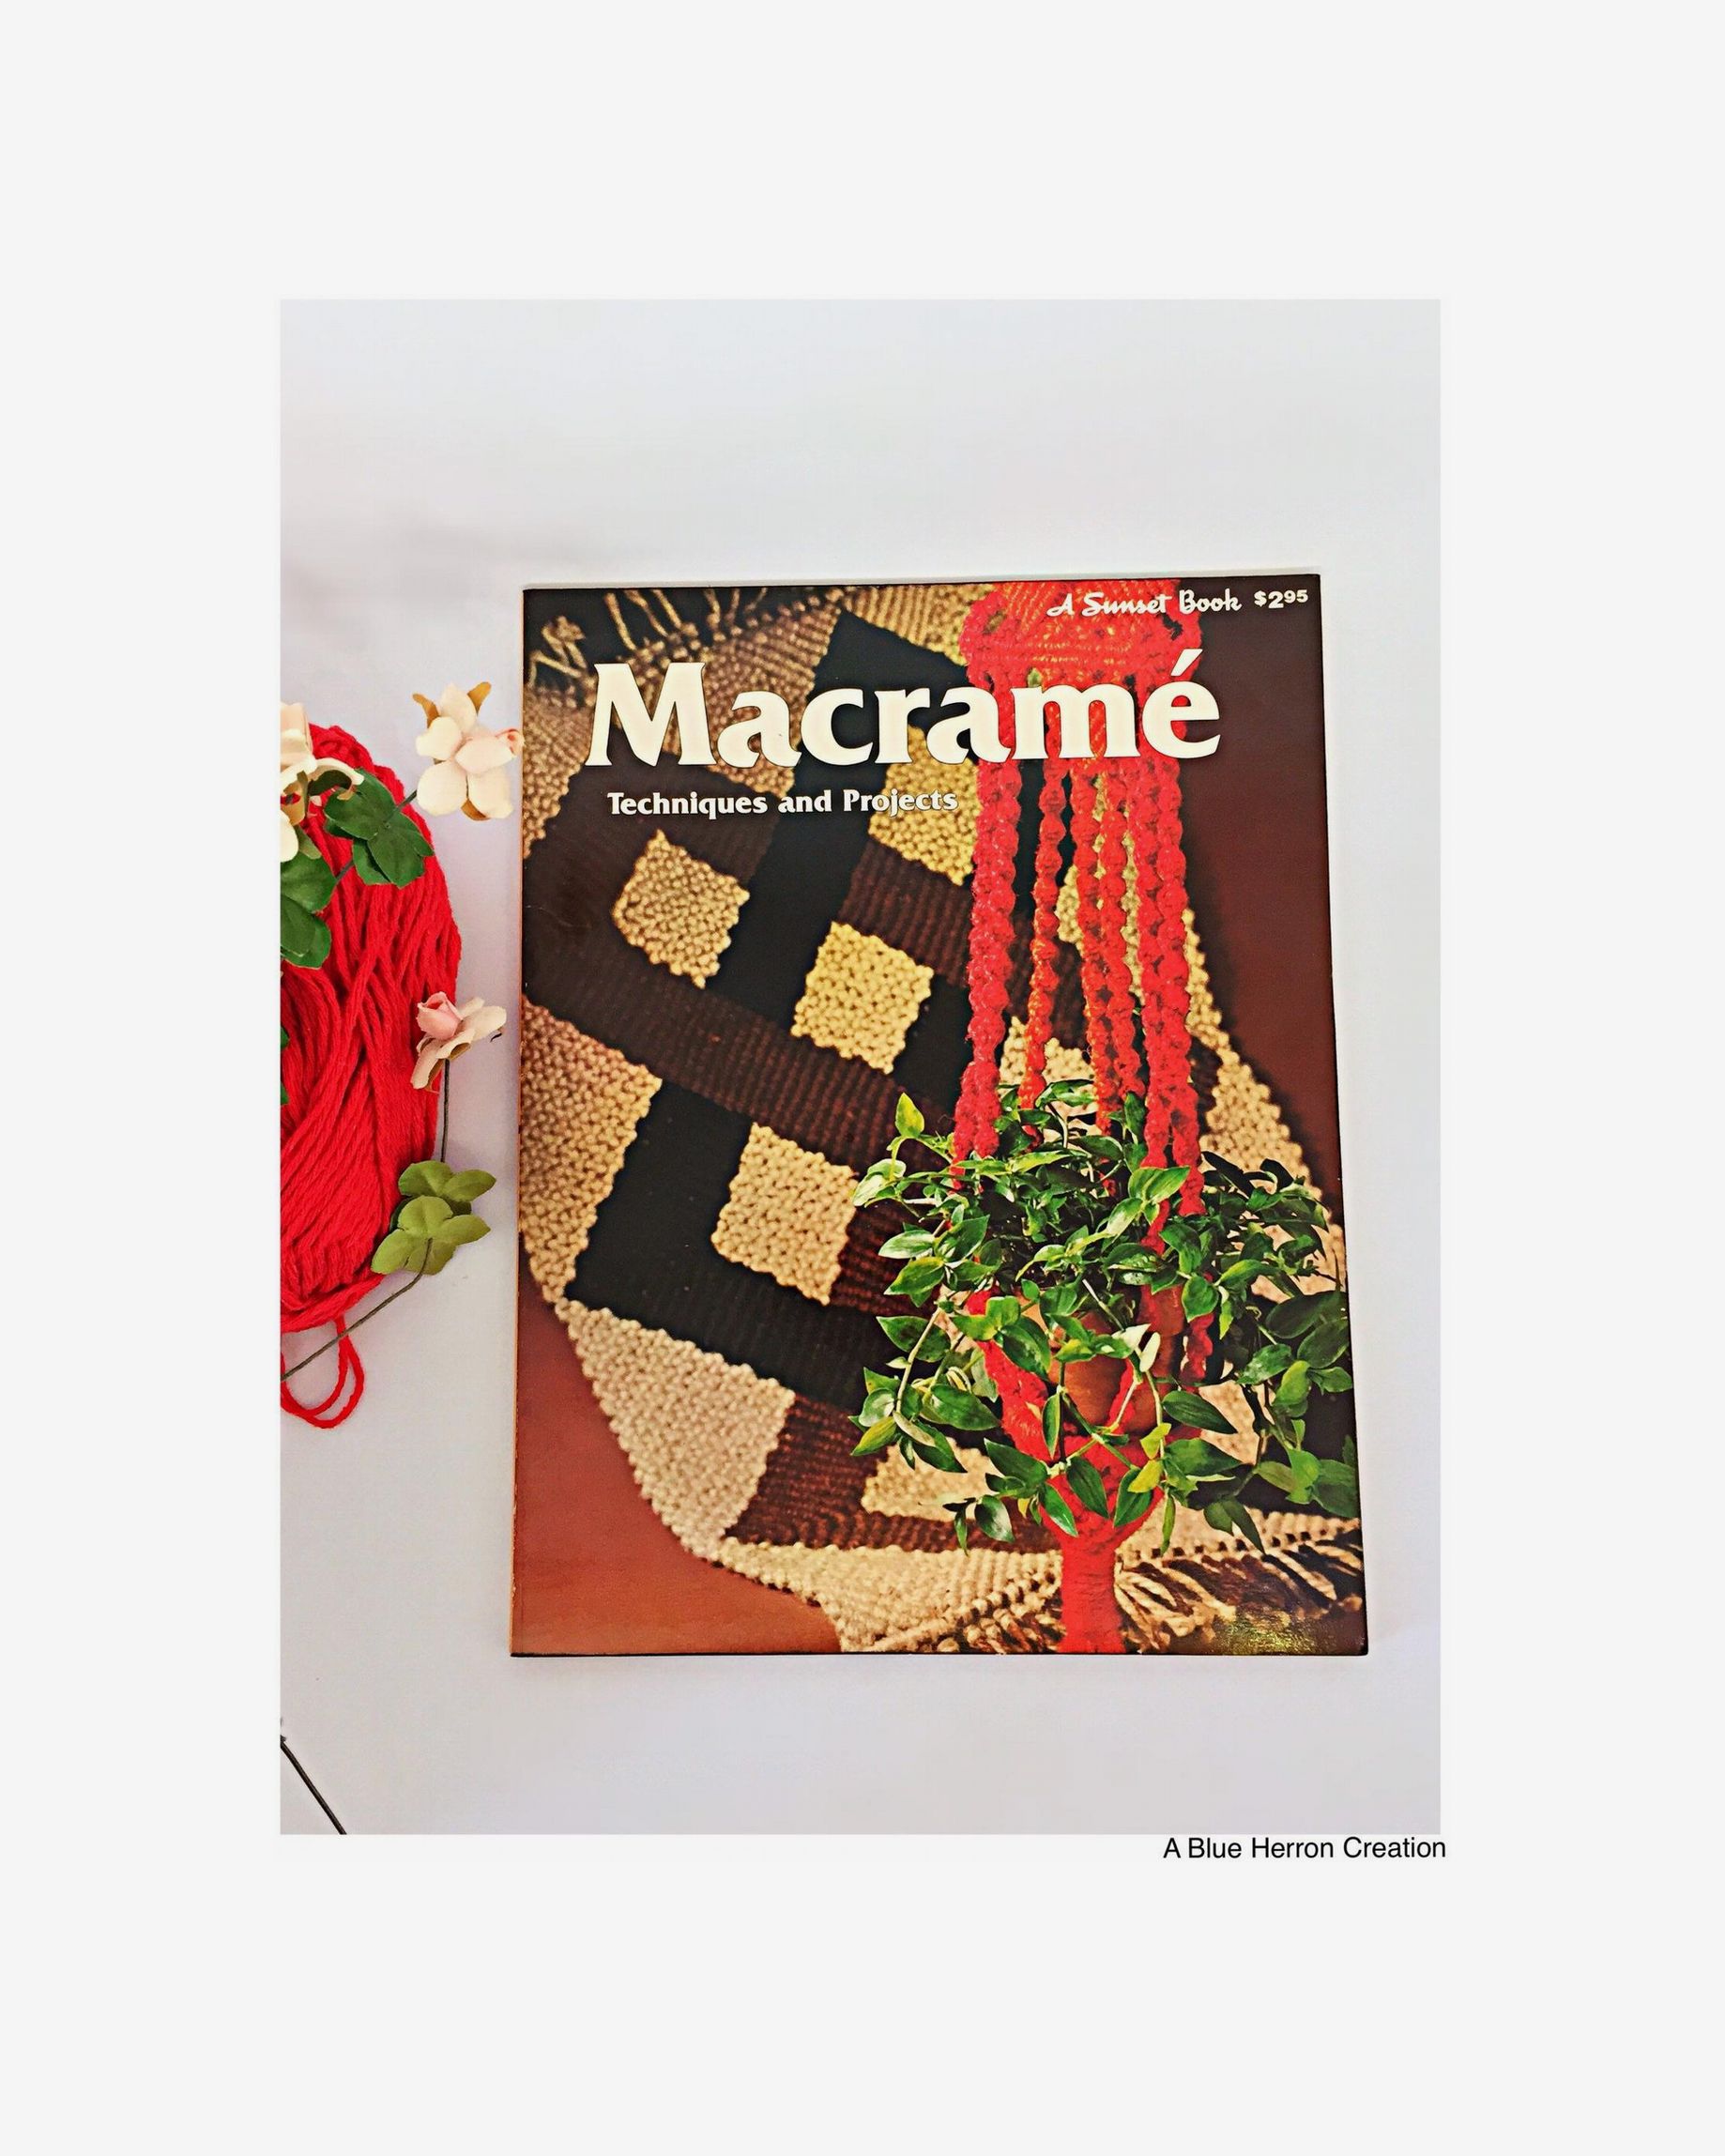 Arts & Crafts Books - How to Macrame